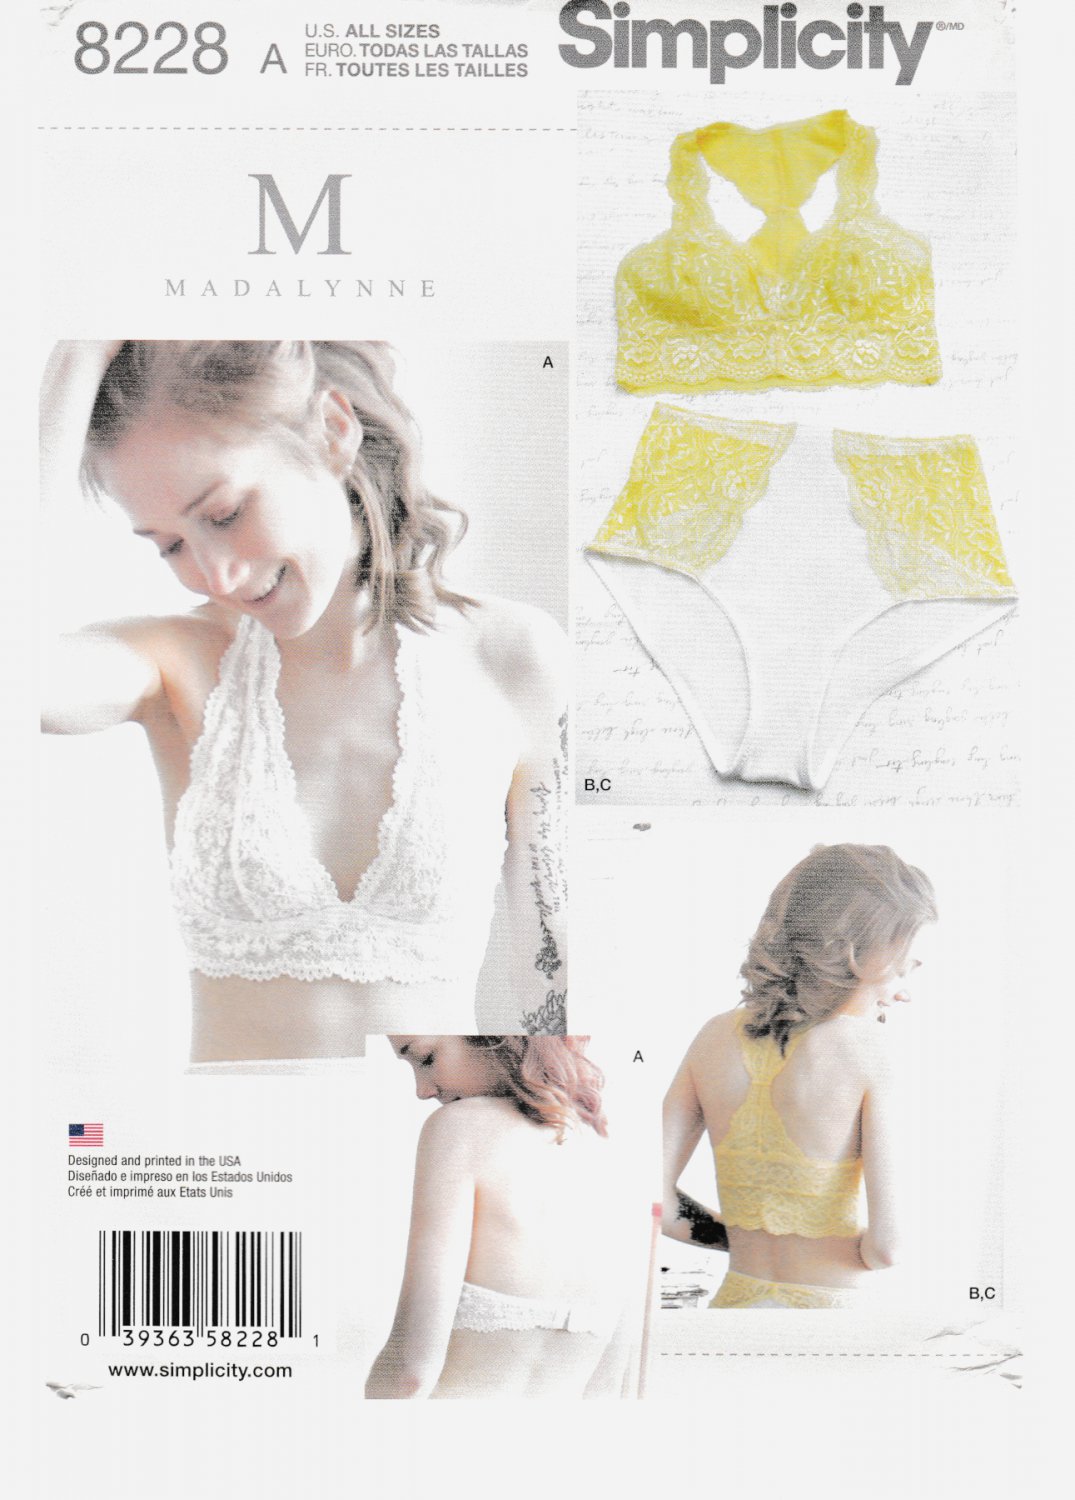 Simplicity 8228 Misses Soft Cup Bras and Panties Sewing Pattern All Sizes